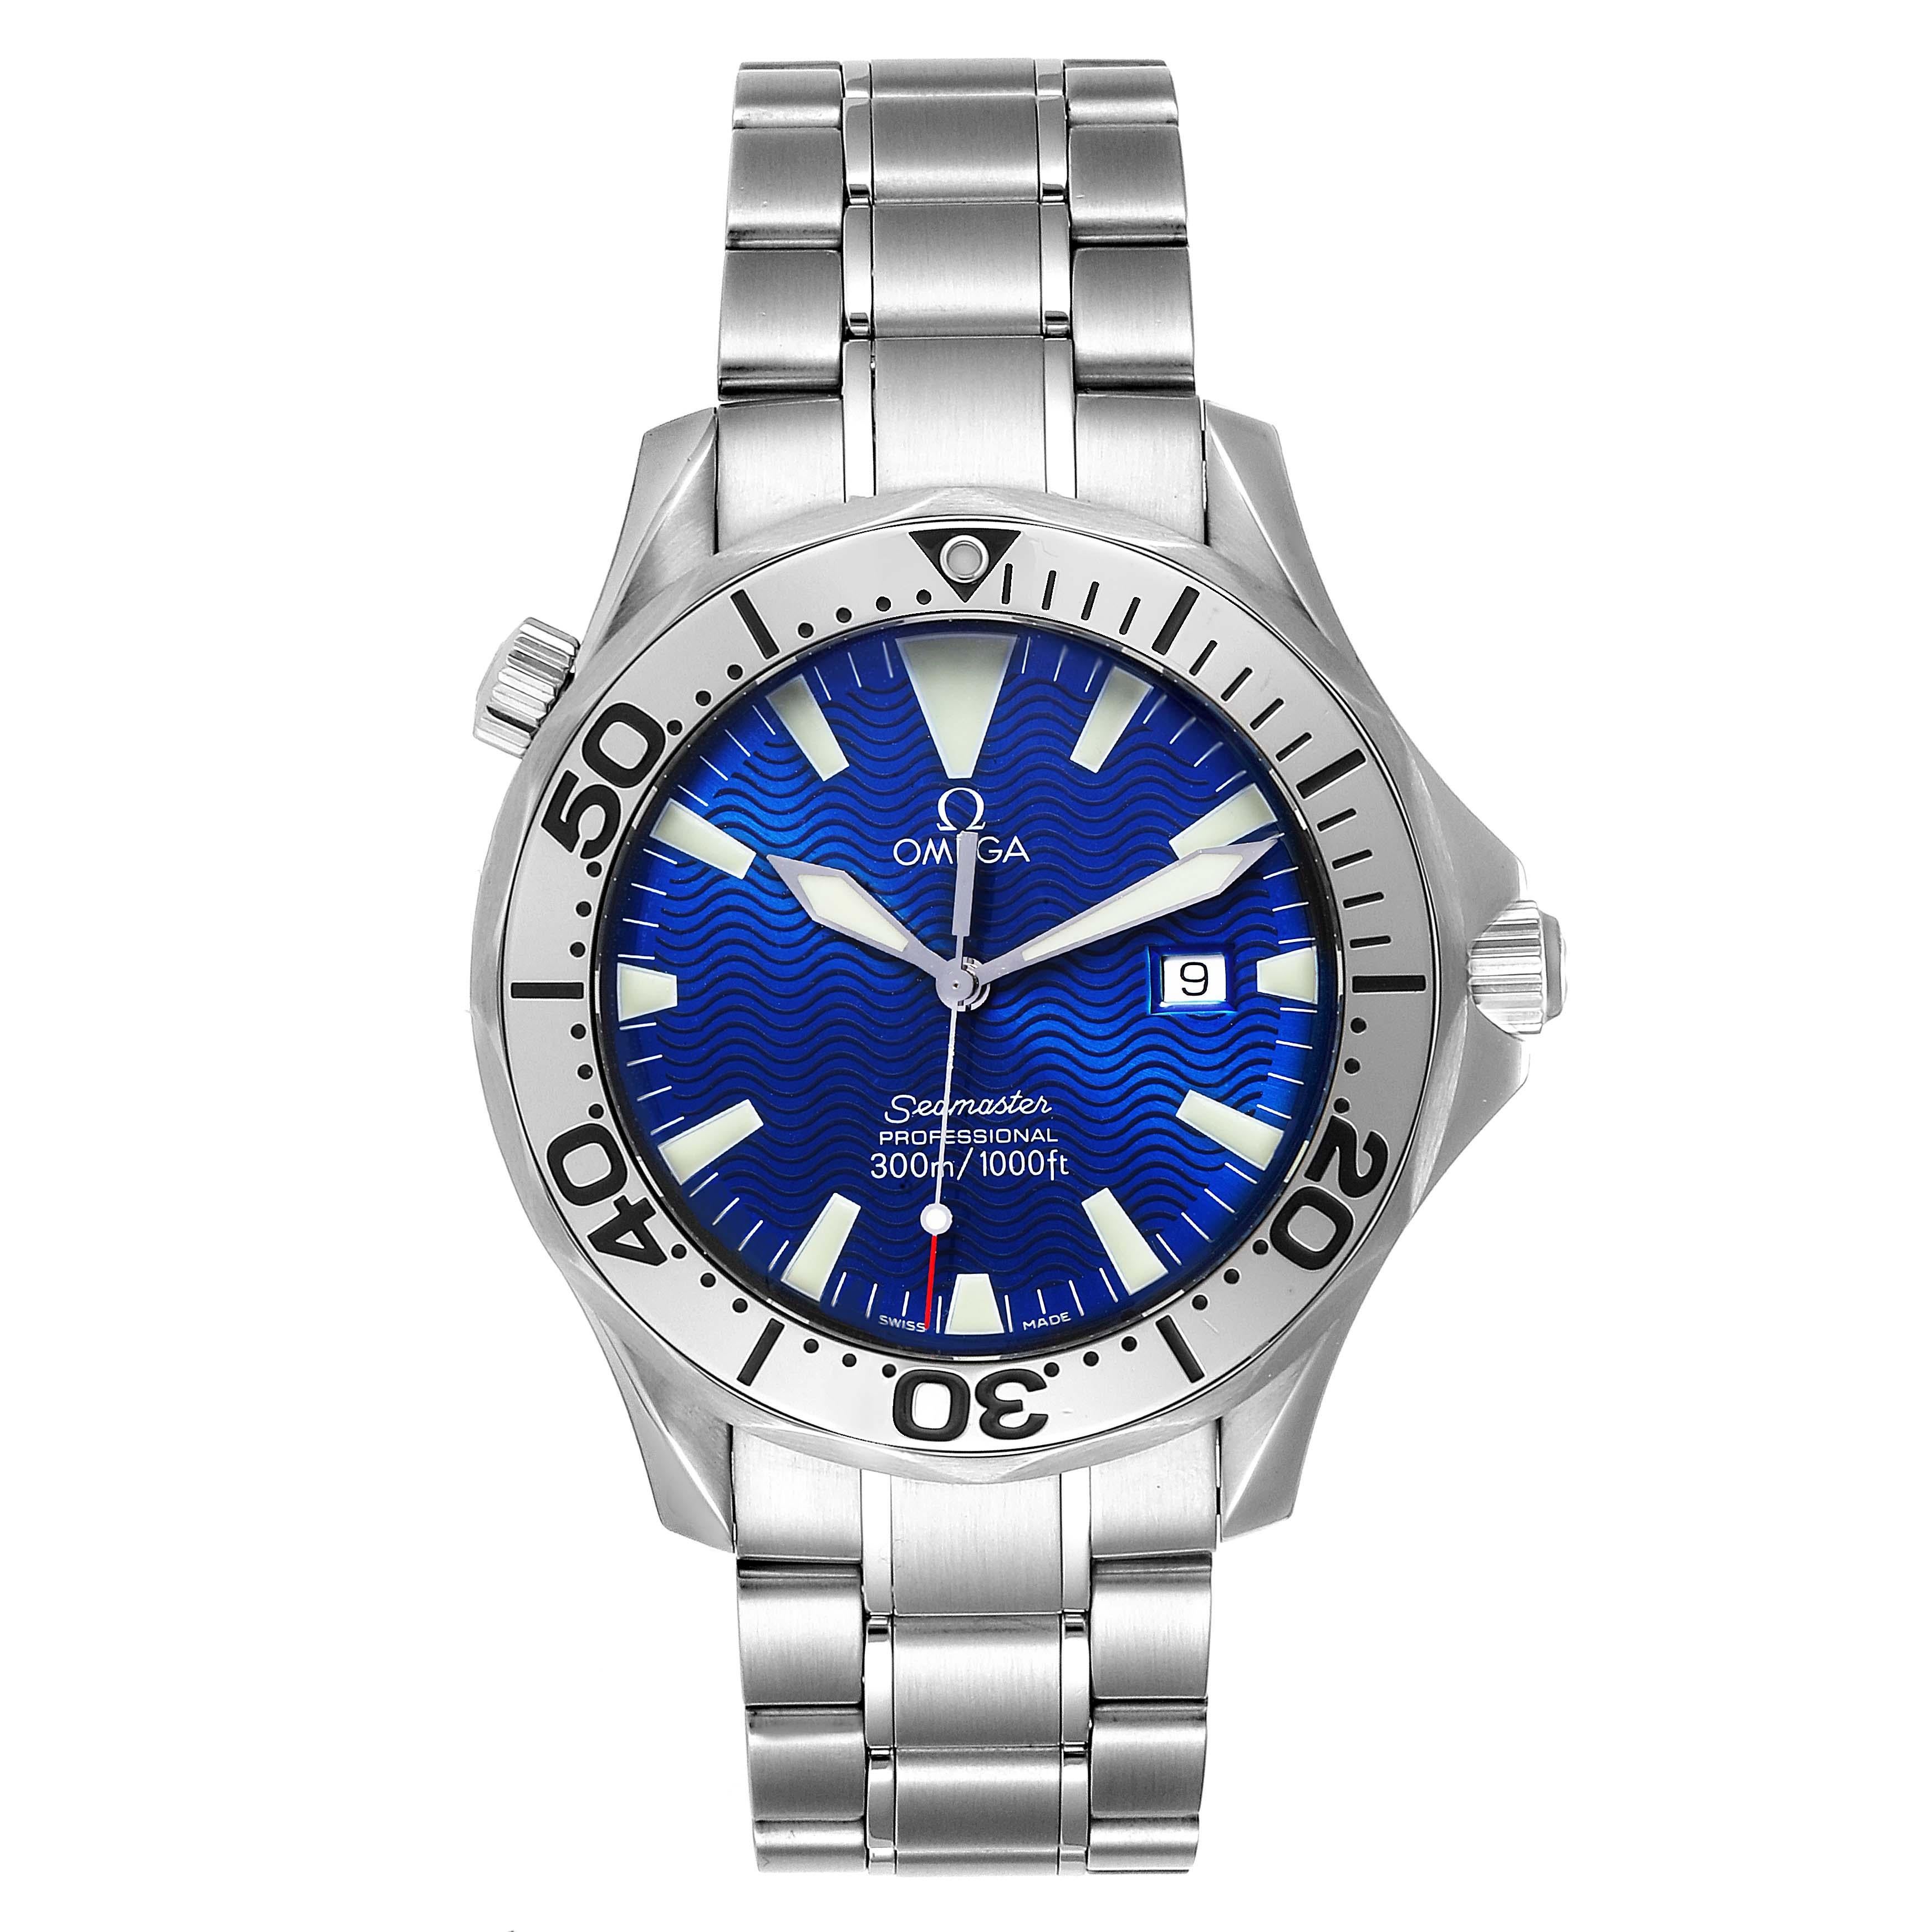 Omega Seamaster Electric Blue Wave Dial Mens Watch 2265.80.00. Quartz precision movement with rhodium-plated finish. Caliber 1538. Stainless steel case 41.0 mm in diameter. Omega logo on a crown. Stainless steel unidirectional rotating bezel.